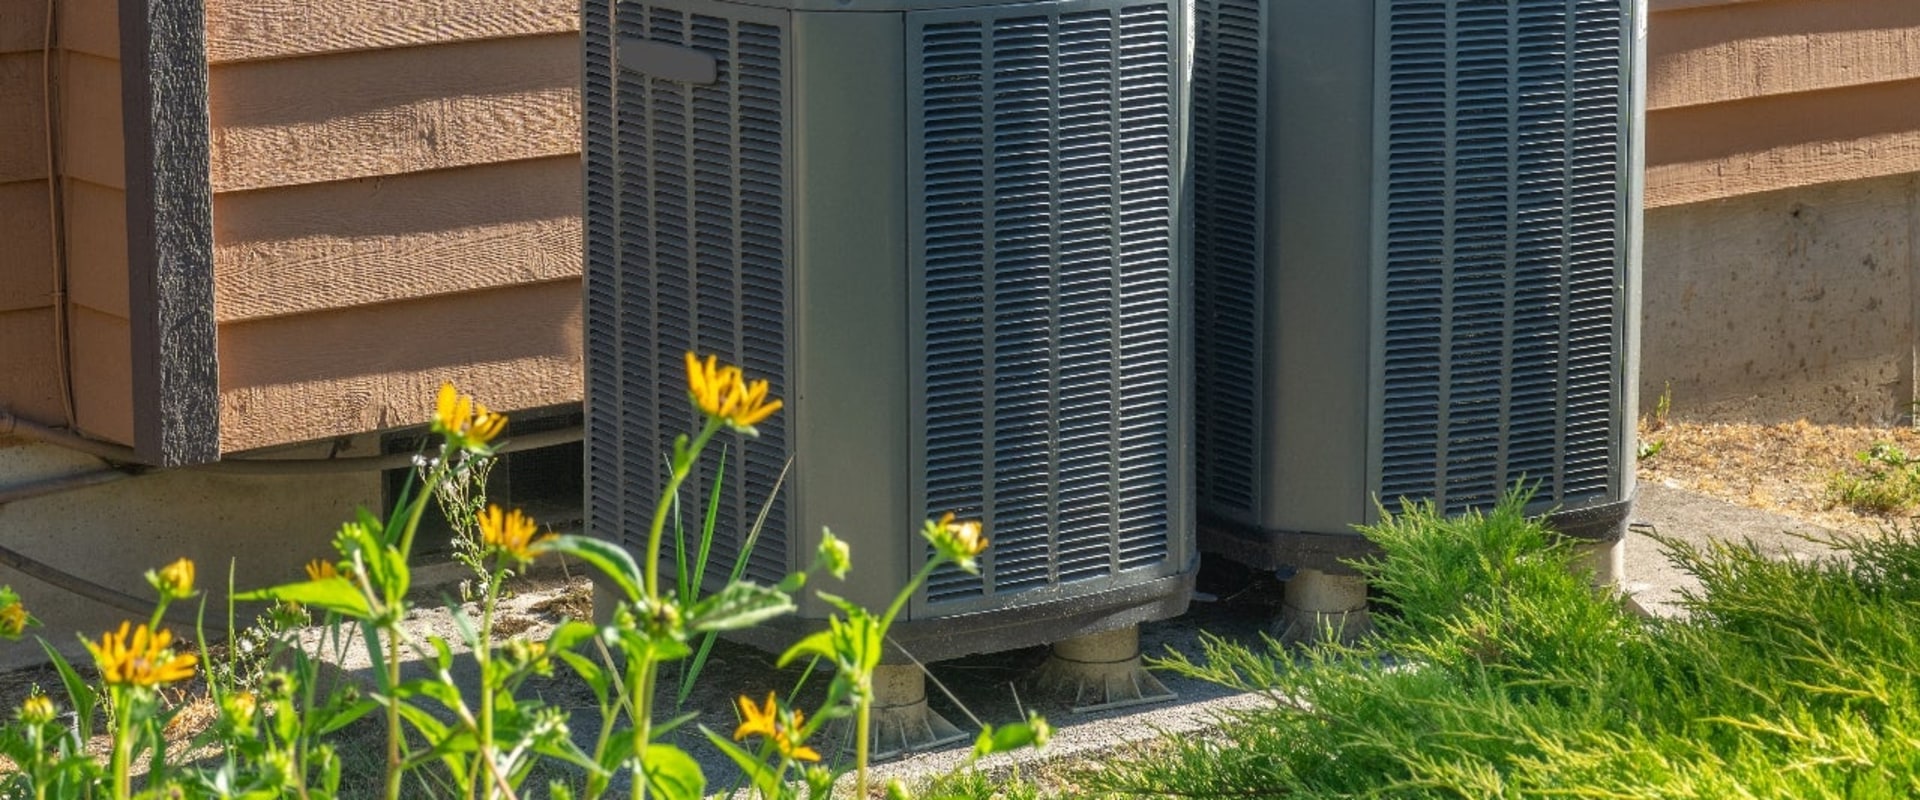 How Much Should You Expect to Pay for a New AC Unit?